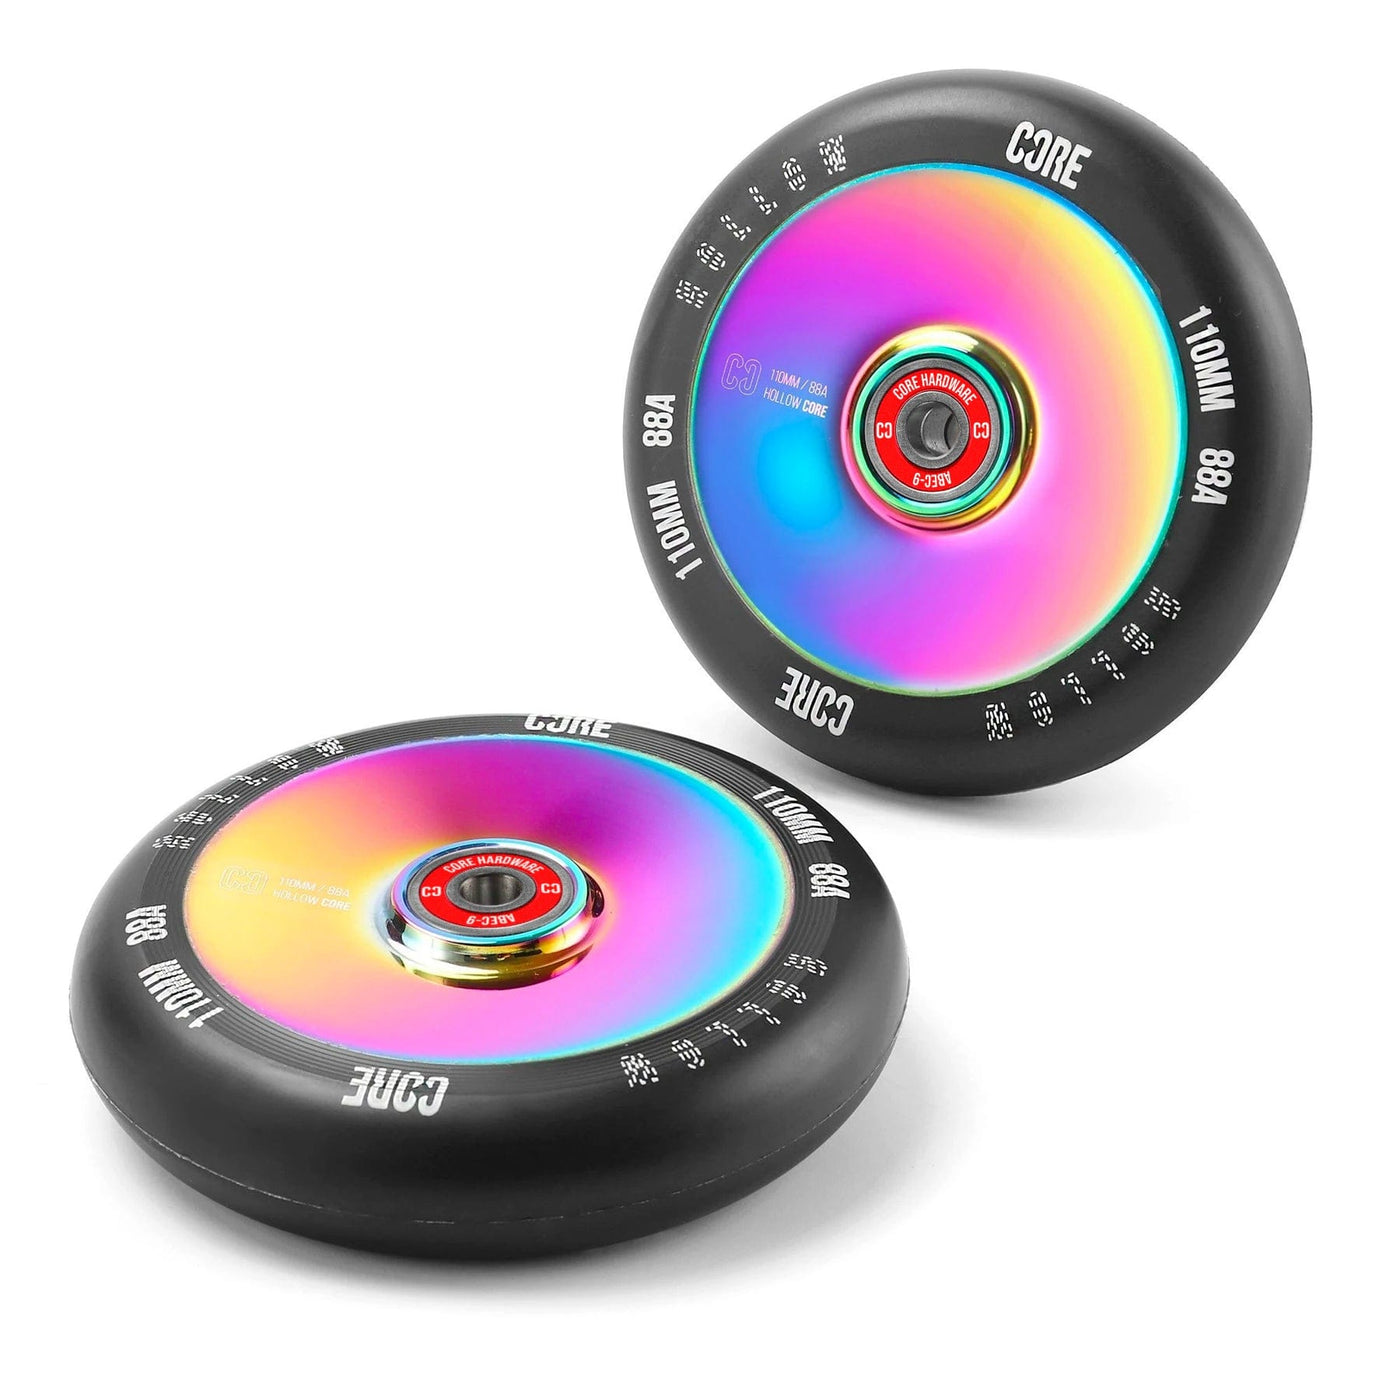 CORE Hollow V2 Neo Chrome Scooter Wheel 110mm I Stunt Scooter Wheel Pair